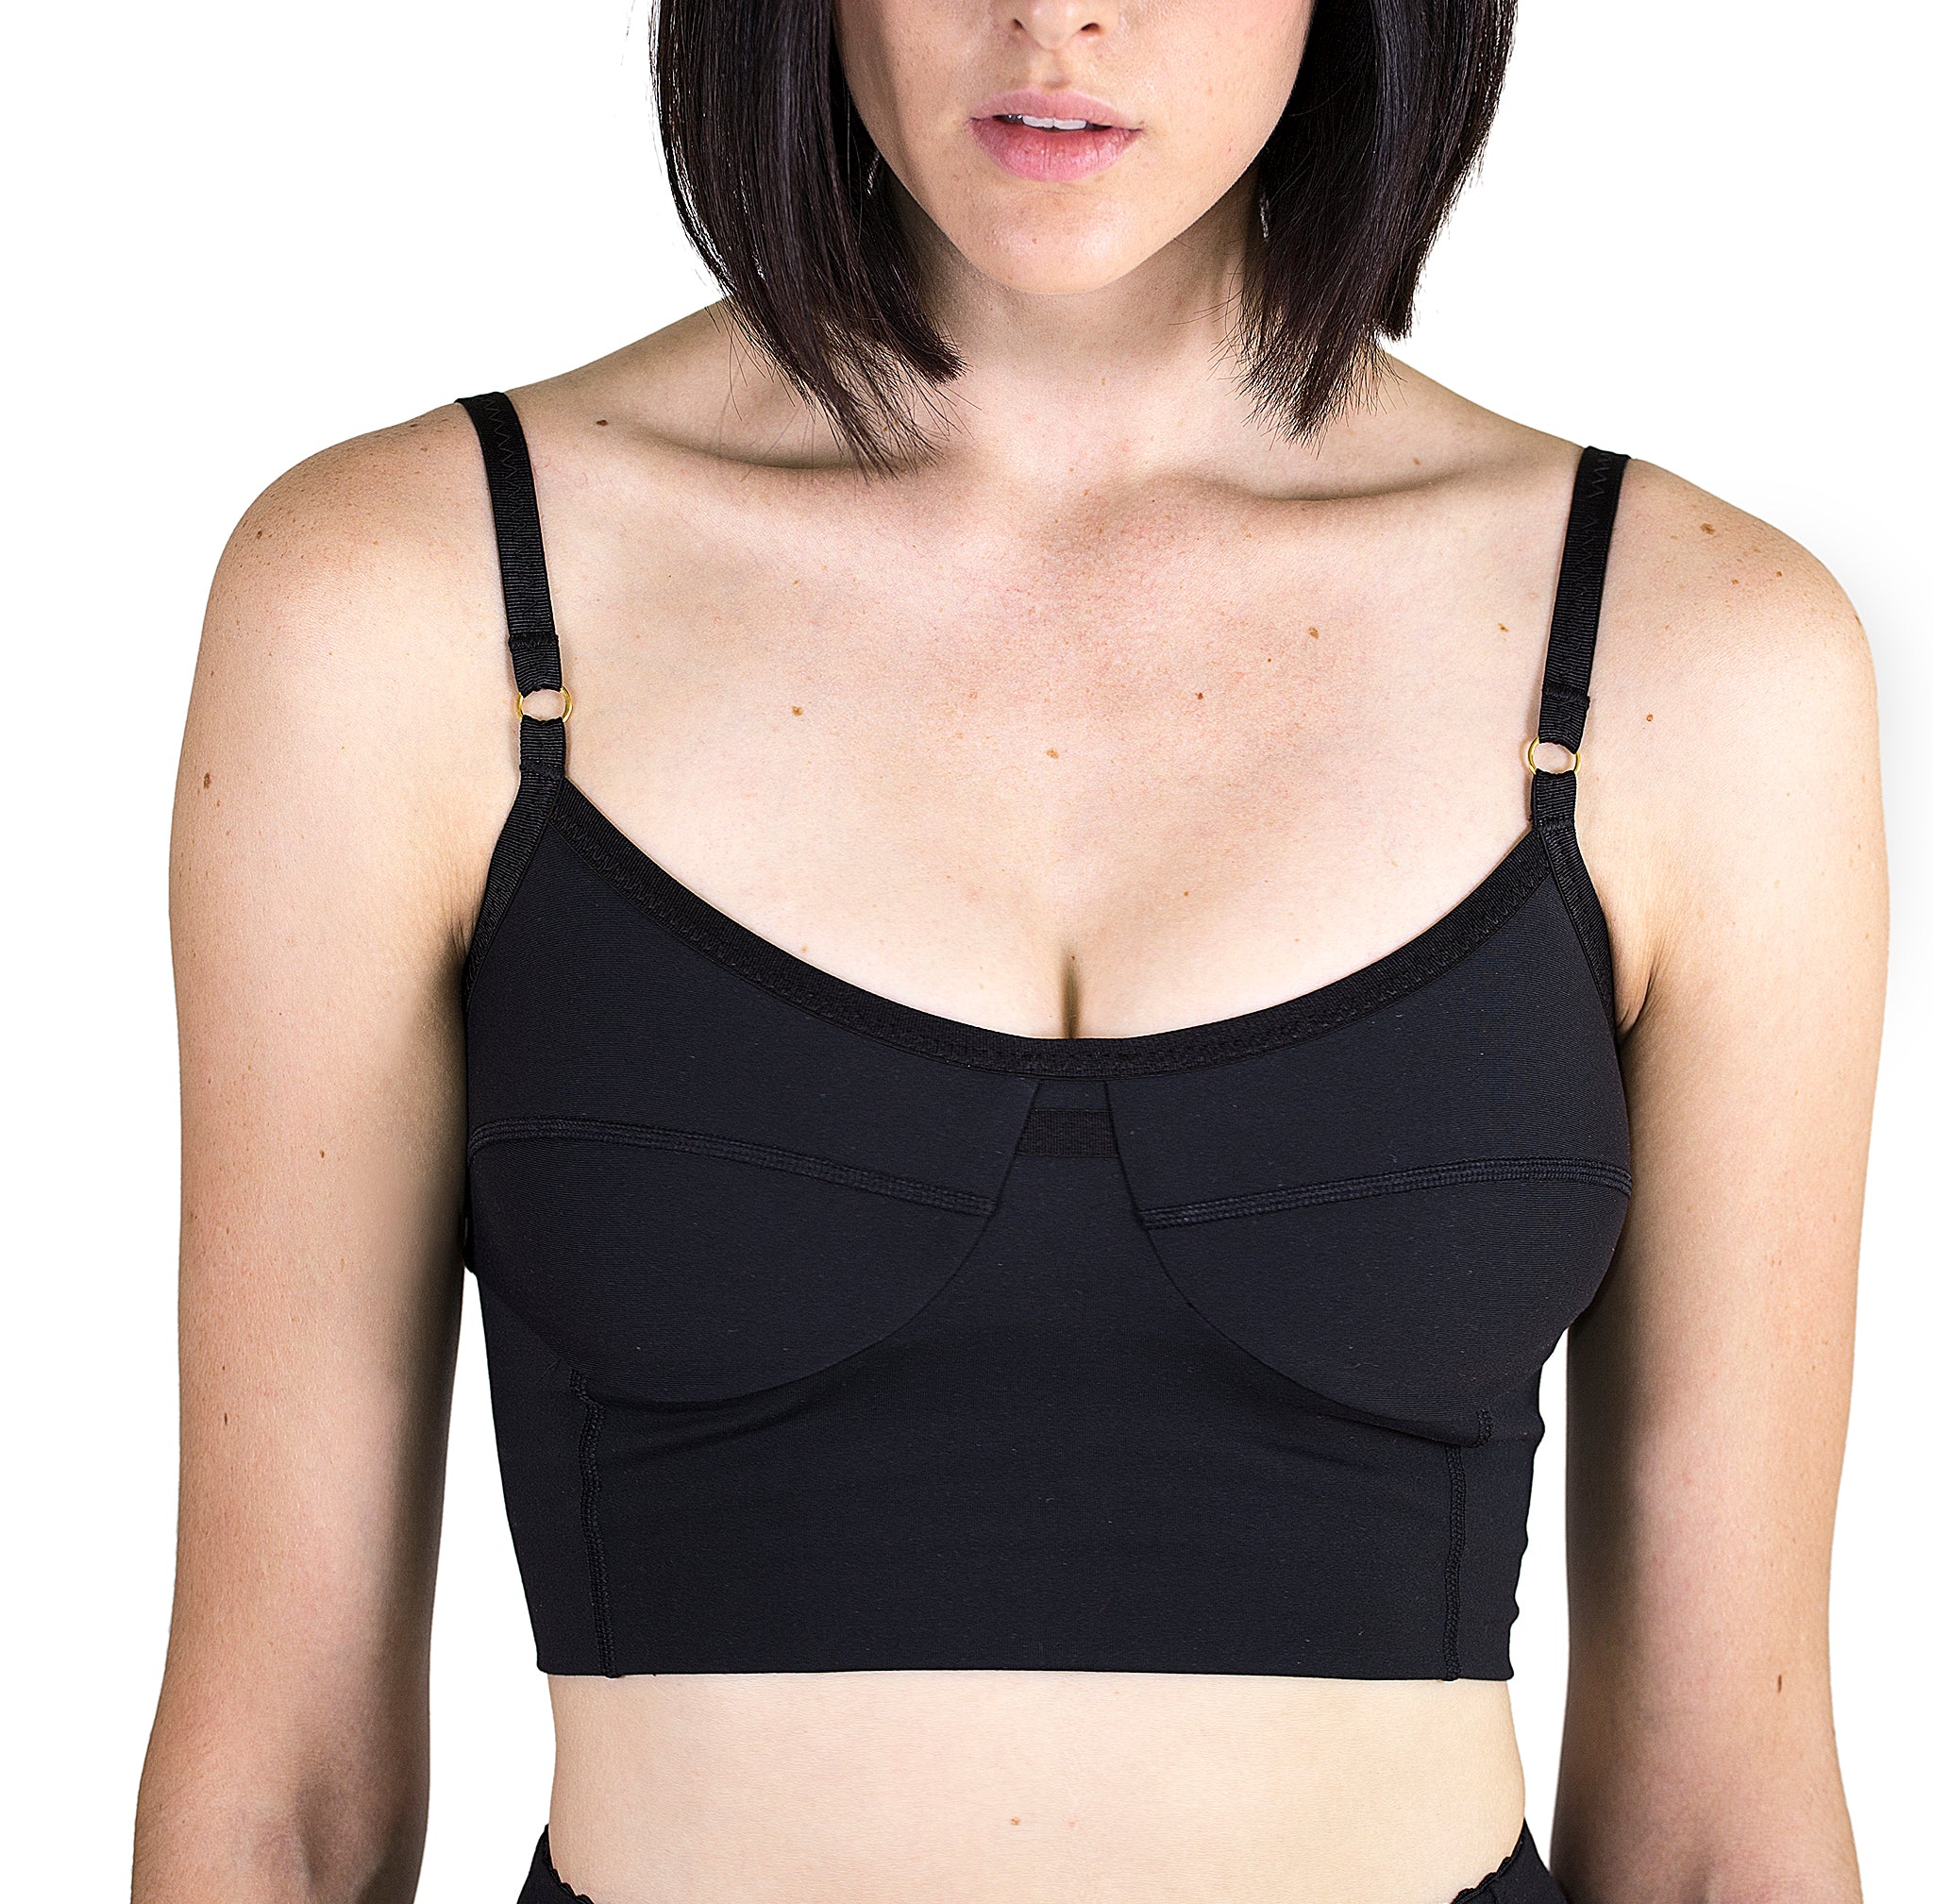 Beautifully designed Bralette in black with grosgrain elastic straps, flattering seam detail and funtional loop at center front.